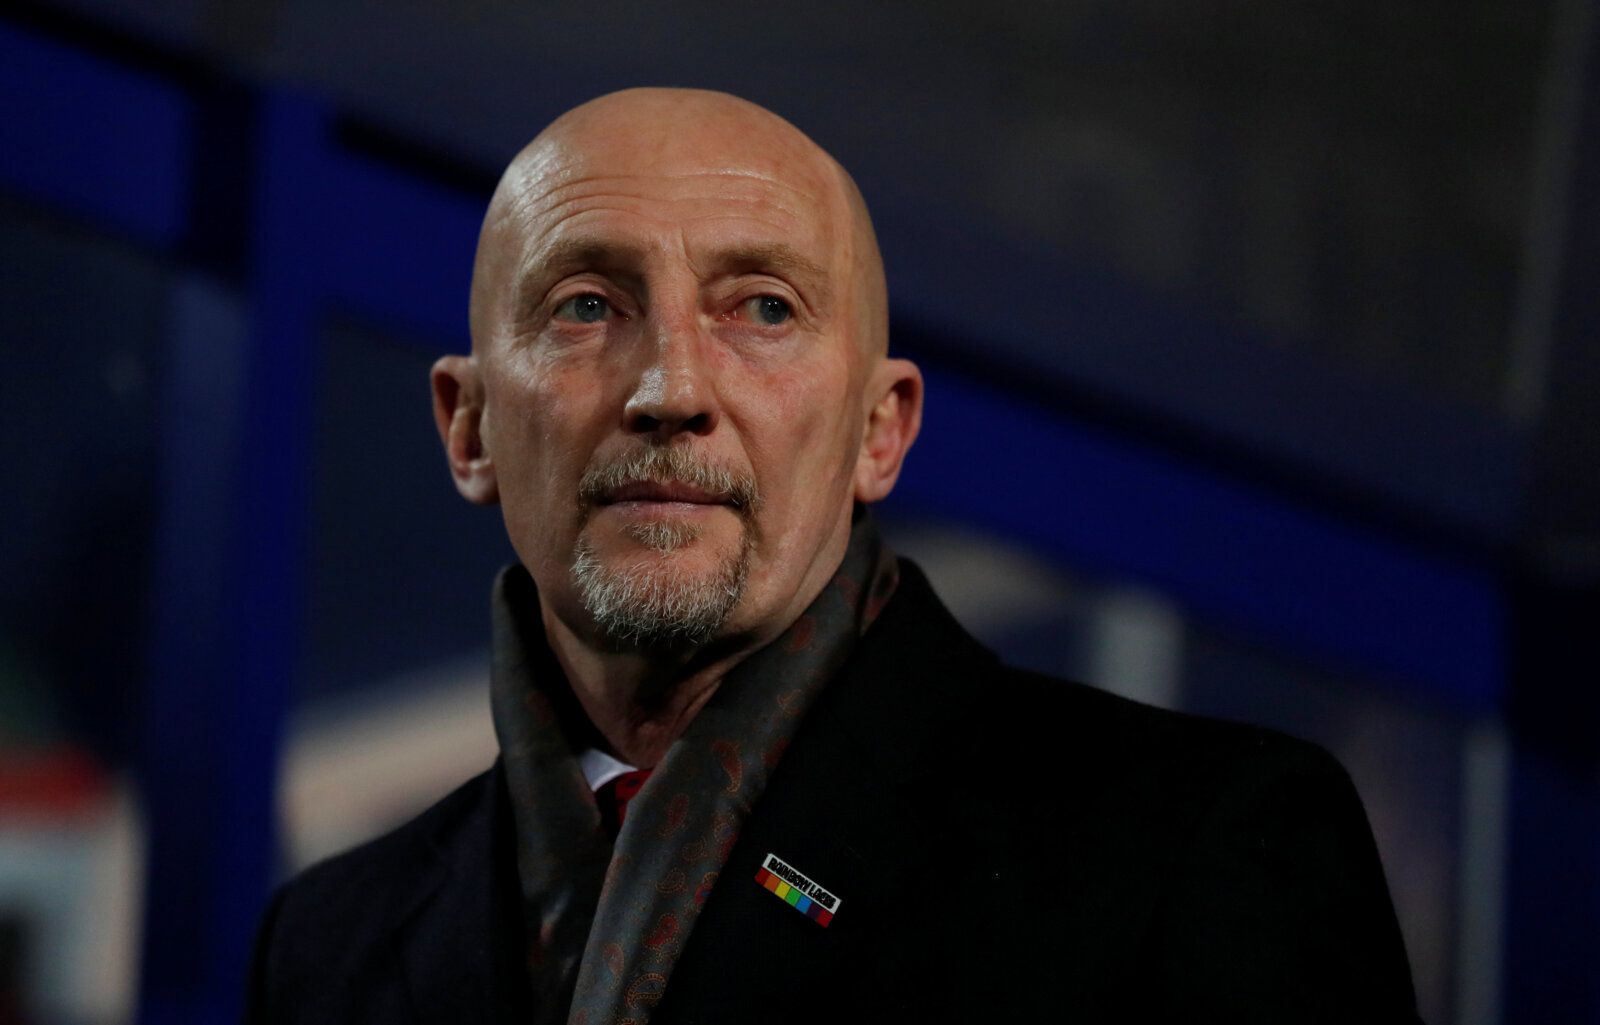 Soccer Football - Championship - Queens Park Rangers vs Brentford - Loftus Road, London, Britain - November 27, 2017   Queens Park Rangers manager Ian Holloway before the match   Action Images/Andrew Couldridge    EDITORIAL USE ONLY. No use with unauthorized audio, video, data, fixture lists, club/league logos or 